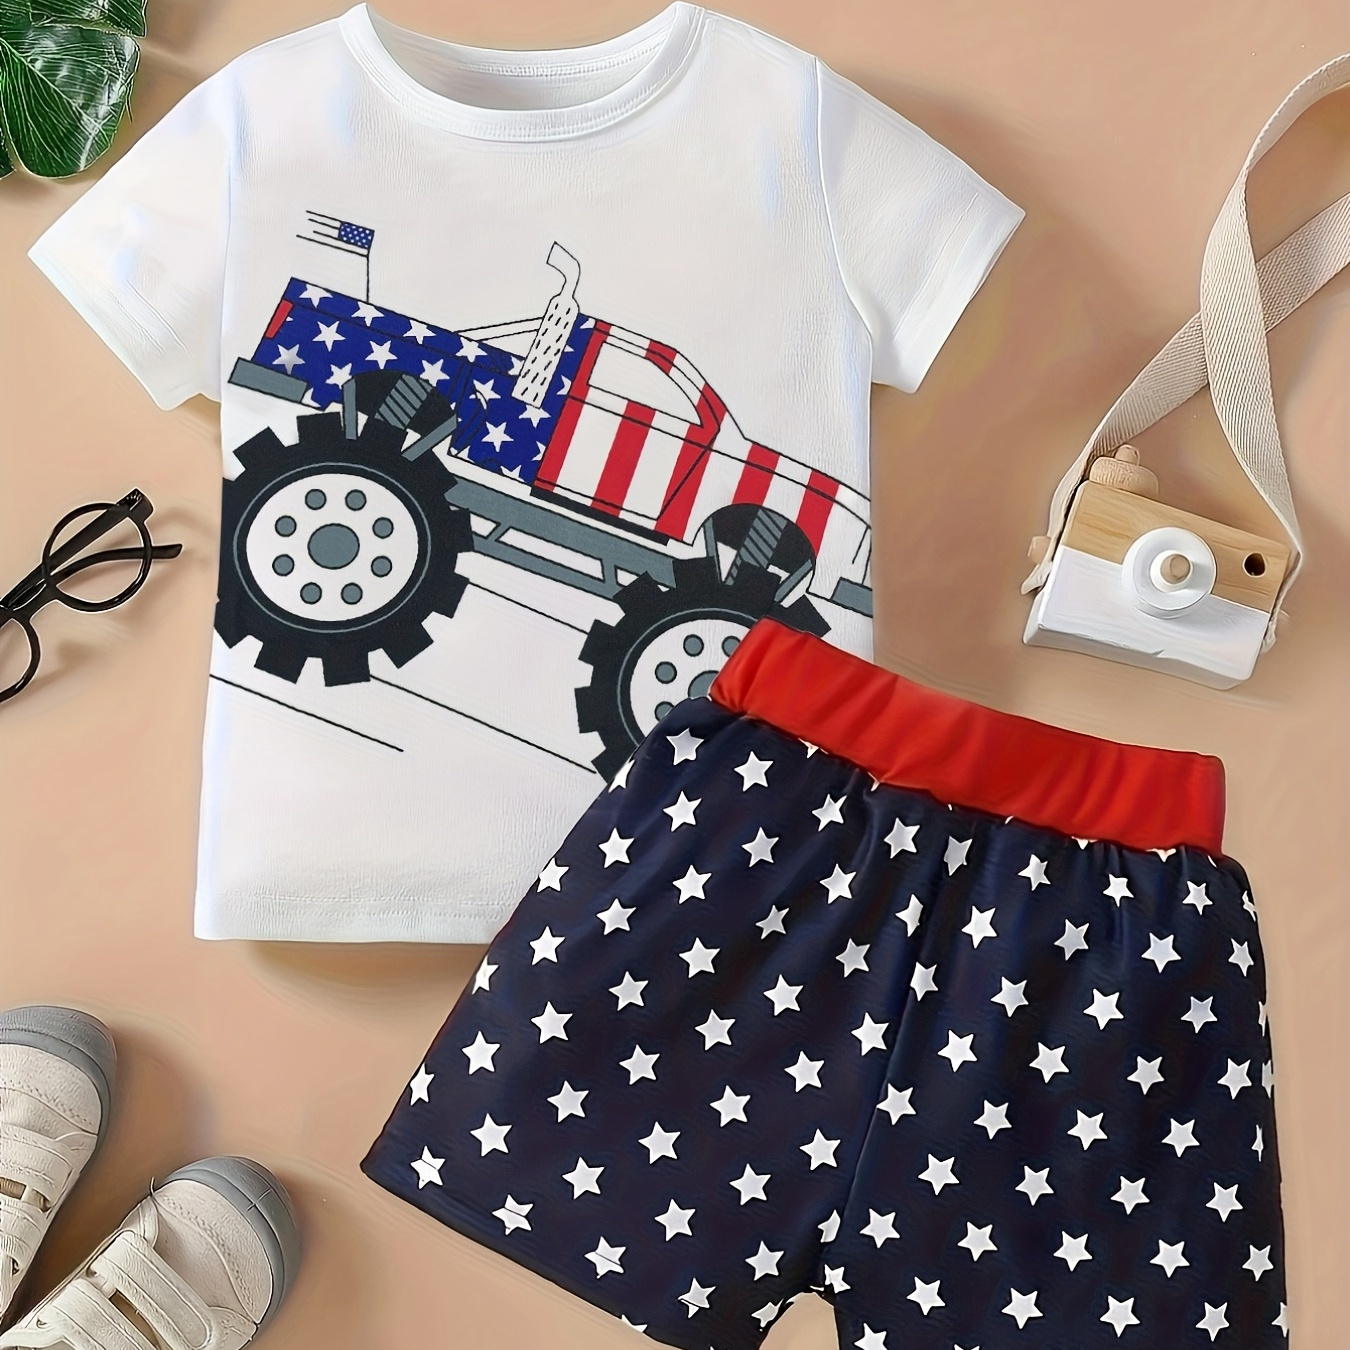 

2pcs Toddler Boys Cartoon Truck Graphic T-shirts Tops & Pentagram Graphic Elastic Waist Shorts Casual Set For Independence Day Kids Summer Clothes